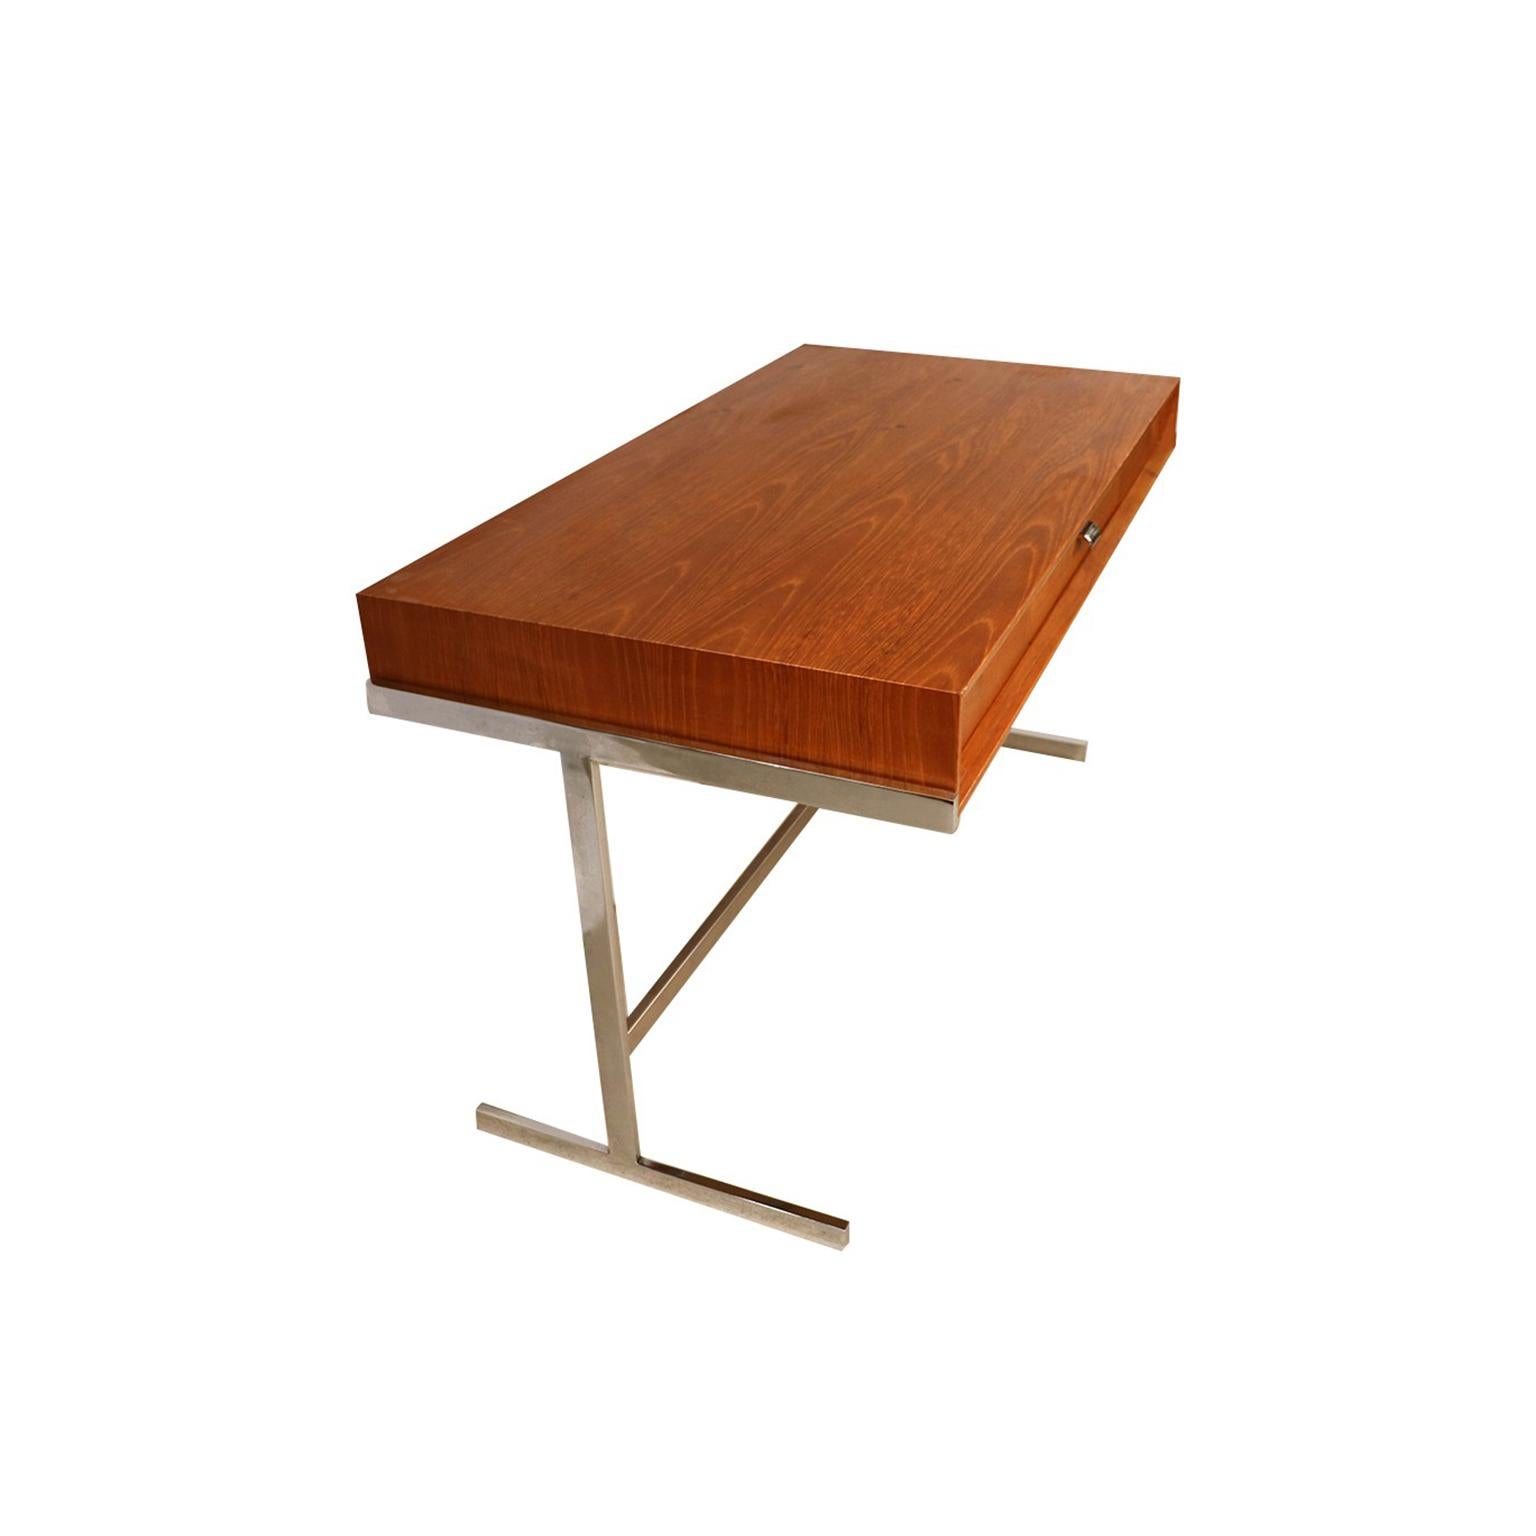 Sophisticated Mid-Century Modern trestle base desk by Royal Board, Sweden, 1960s. Featuring a beautiful teak case resting on a striking and unique polished stainless-steel trestle base with foot rail, creating a stunning contrast of textures. A